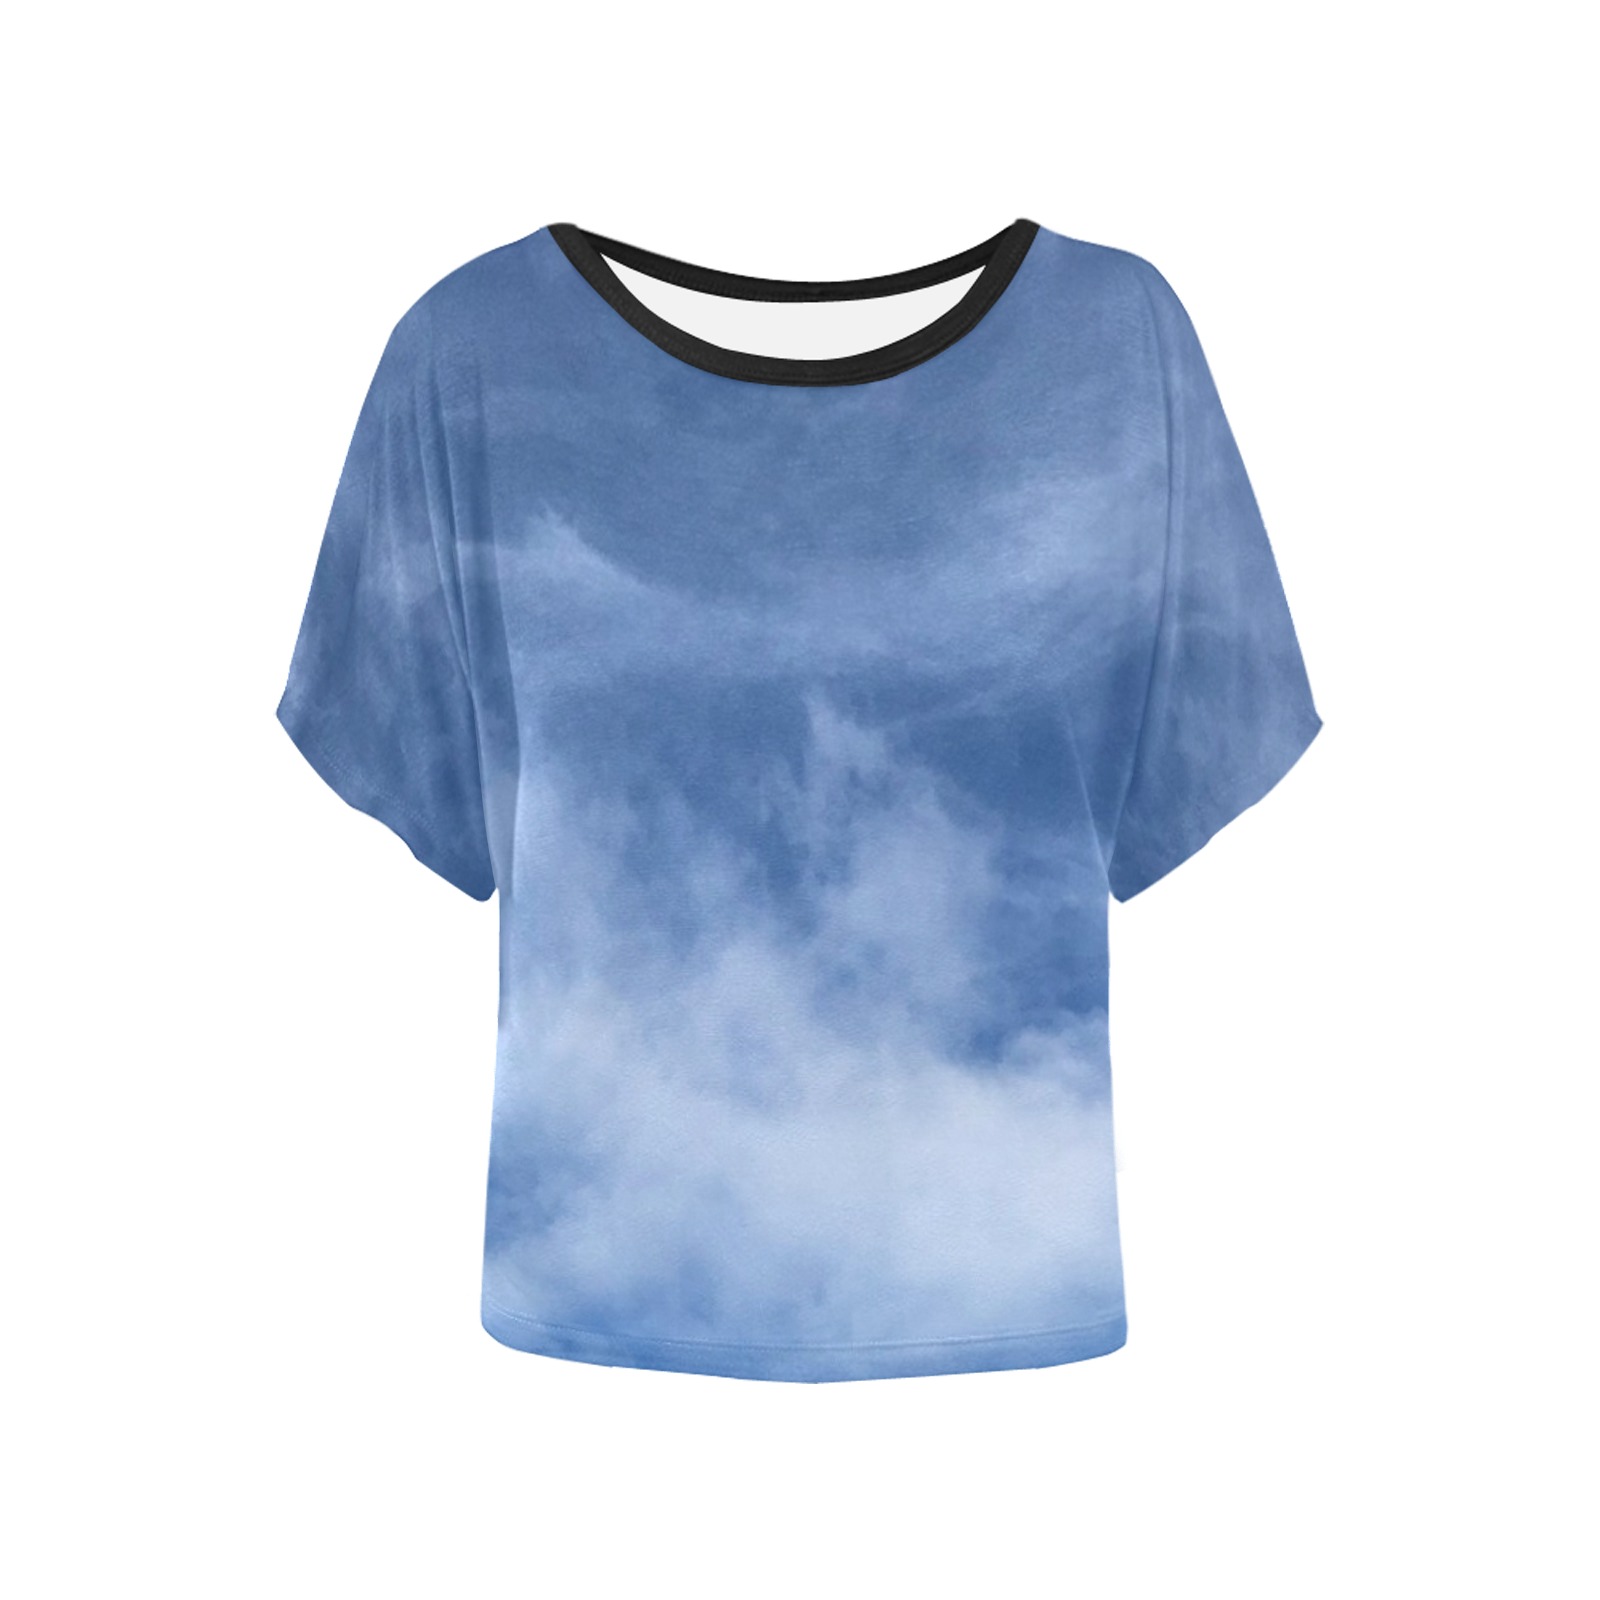 Sky Wishes Women's Batwing-Sleeved Blouse T shirt (Model T44)